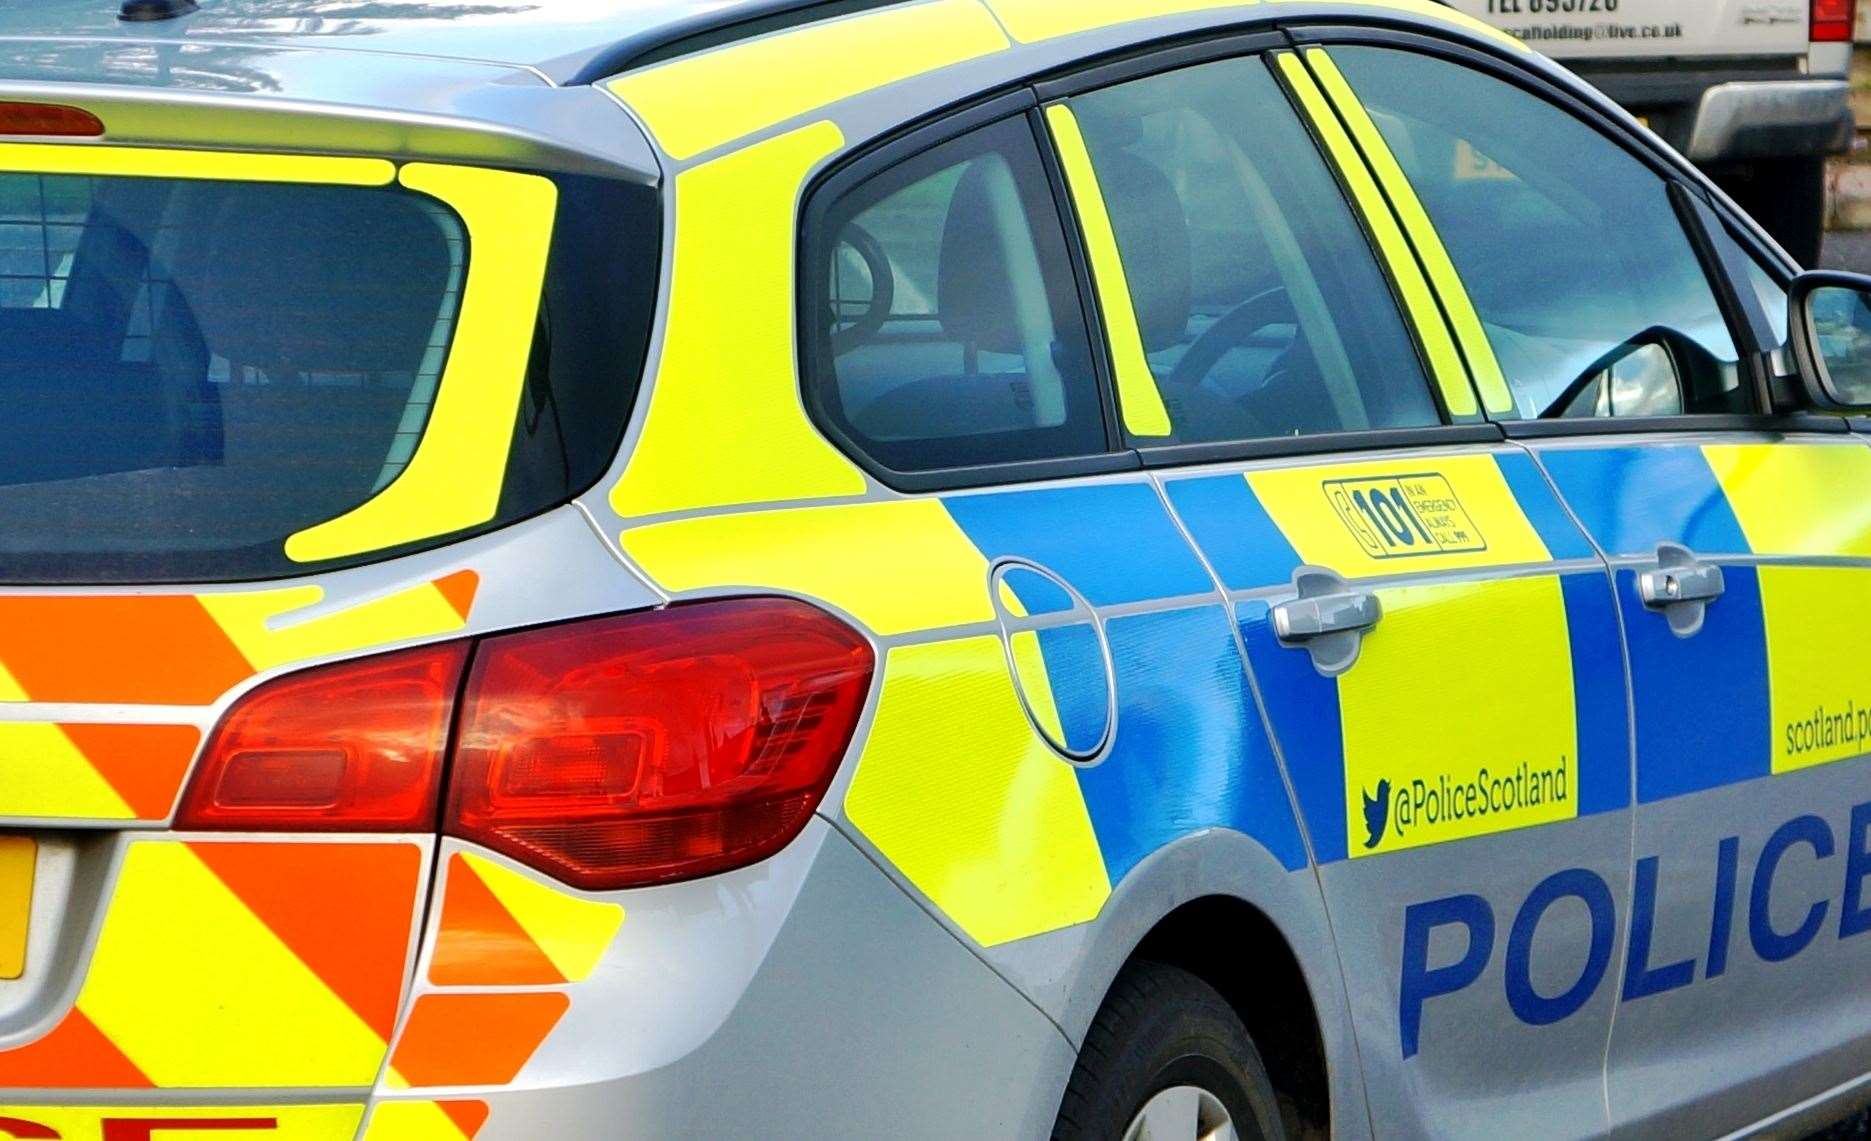 Police are appealing for information after a fatal crash in the Kirk, Caithness area.